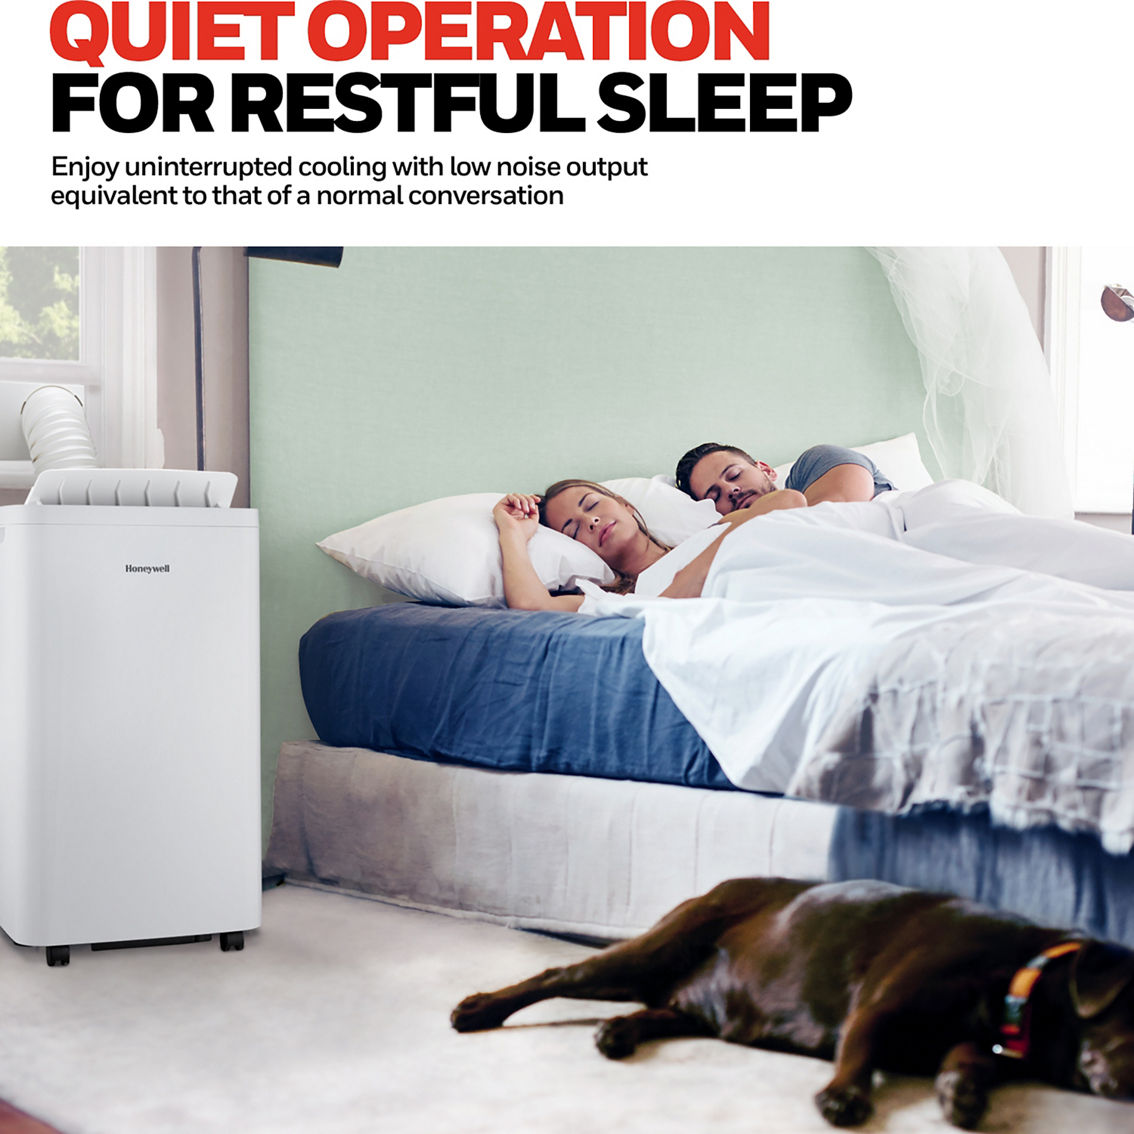 Honeywell 12,000 BTU Portable Air Condition with Dehumidifier and Fan in White - Image 7 of 9